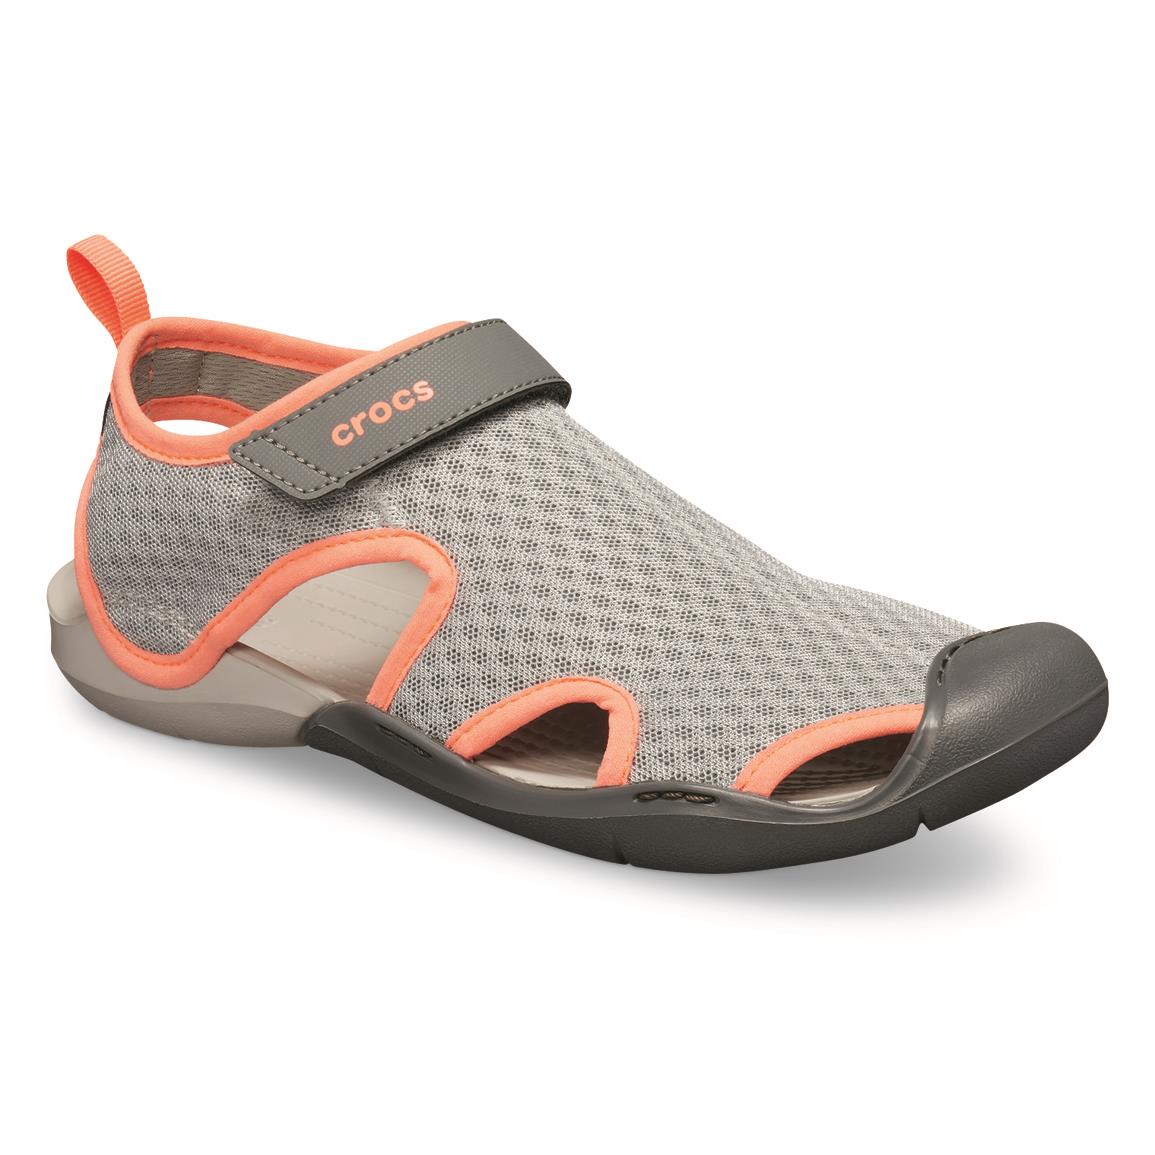 Mens Crocs Swiftwater Mesh Deck Closed Toe Beach Pool Rubber Sandals All Sizes